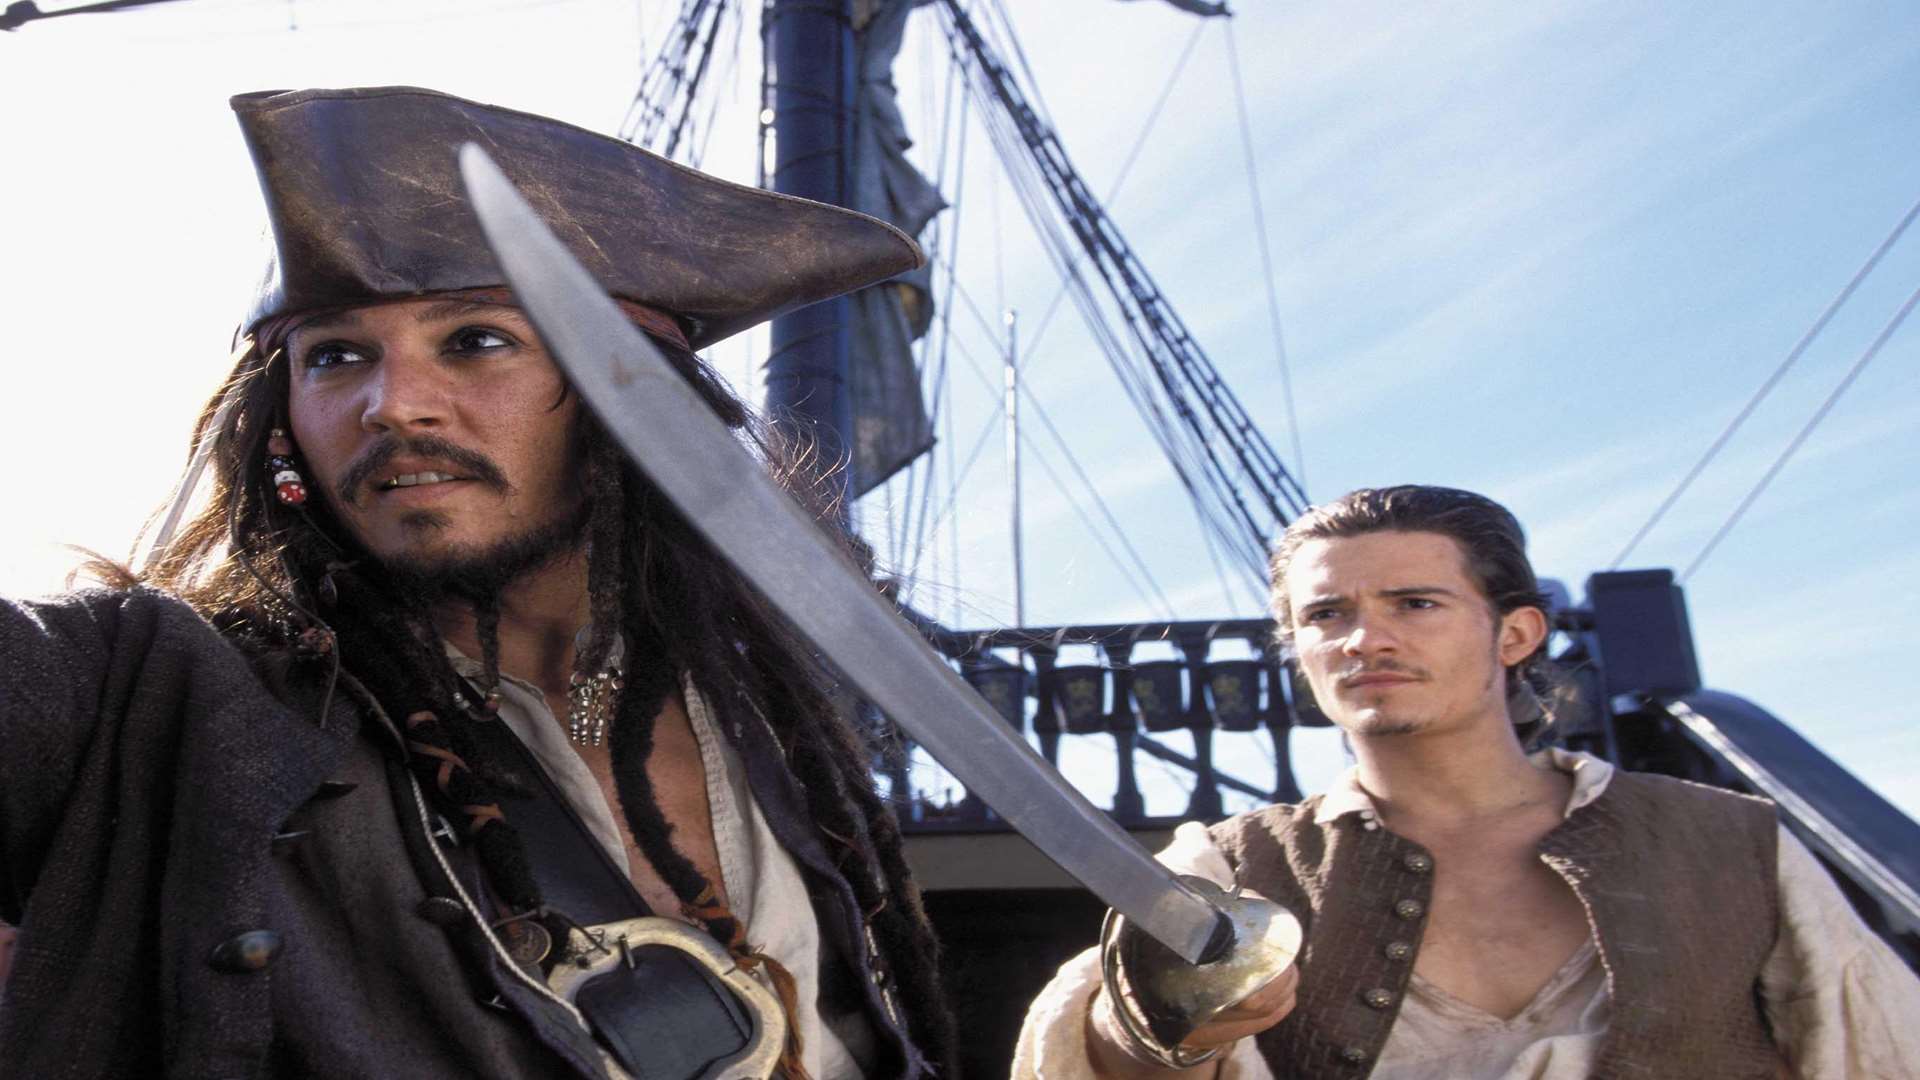 Johnny Depp and Orlando Bloom in Pirates of the Caribbean: The Curse of the Black Pearl. Picture: Disney/Moviestore Collection Ltd